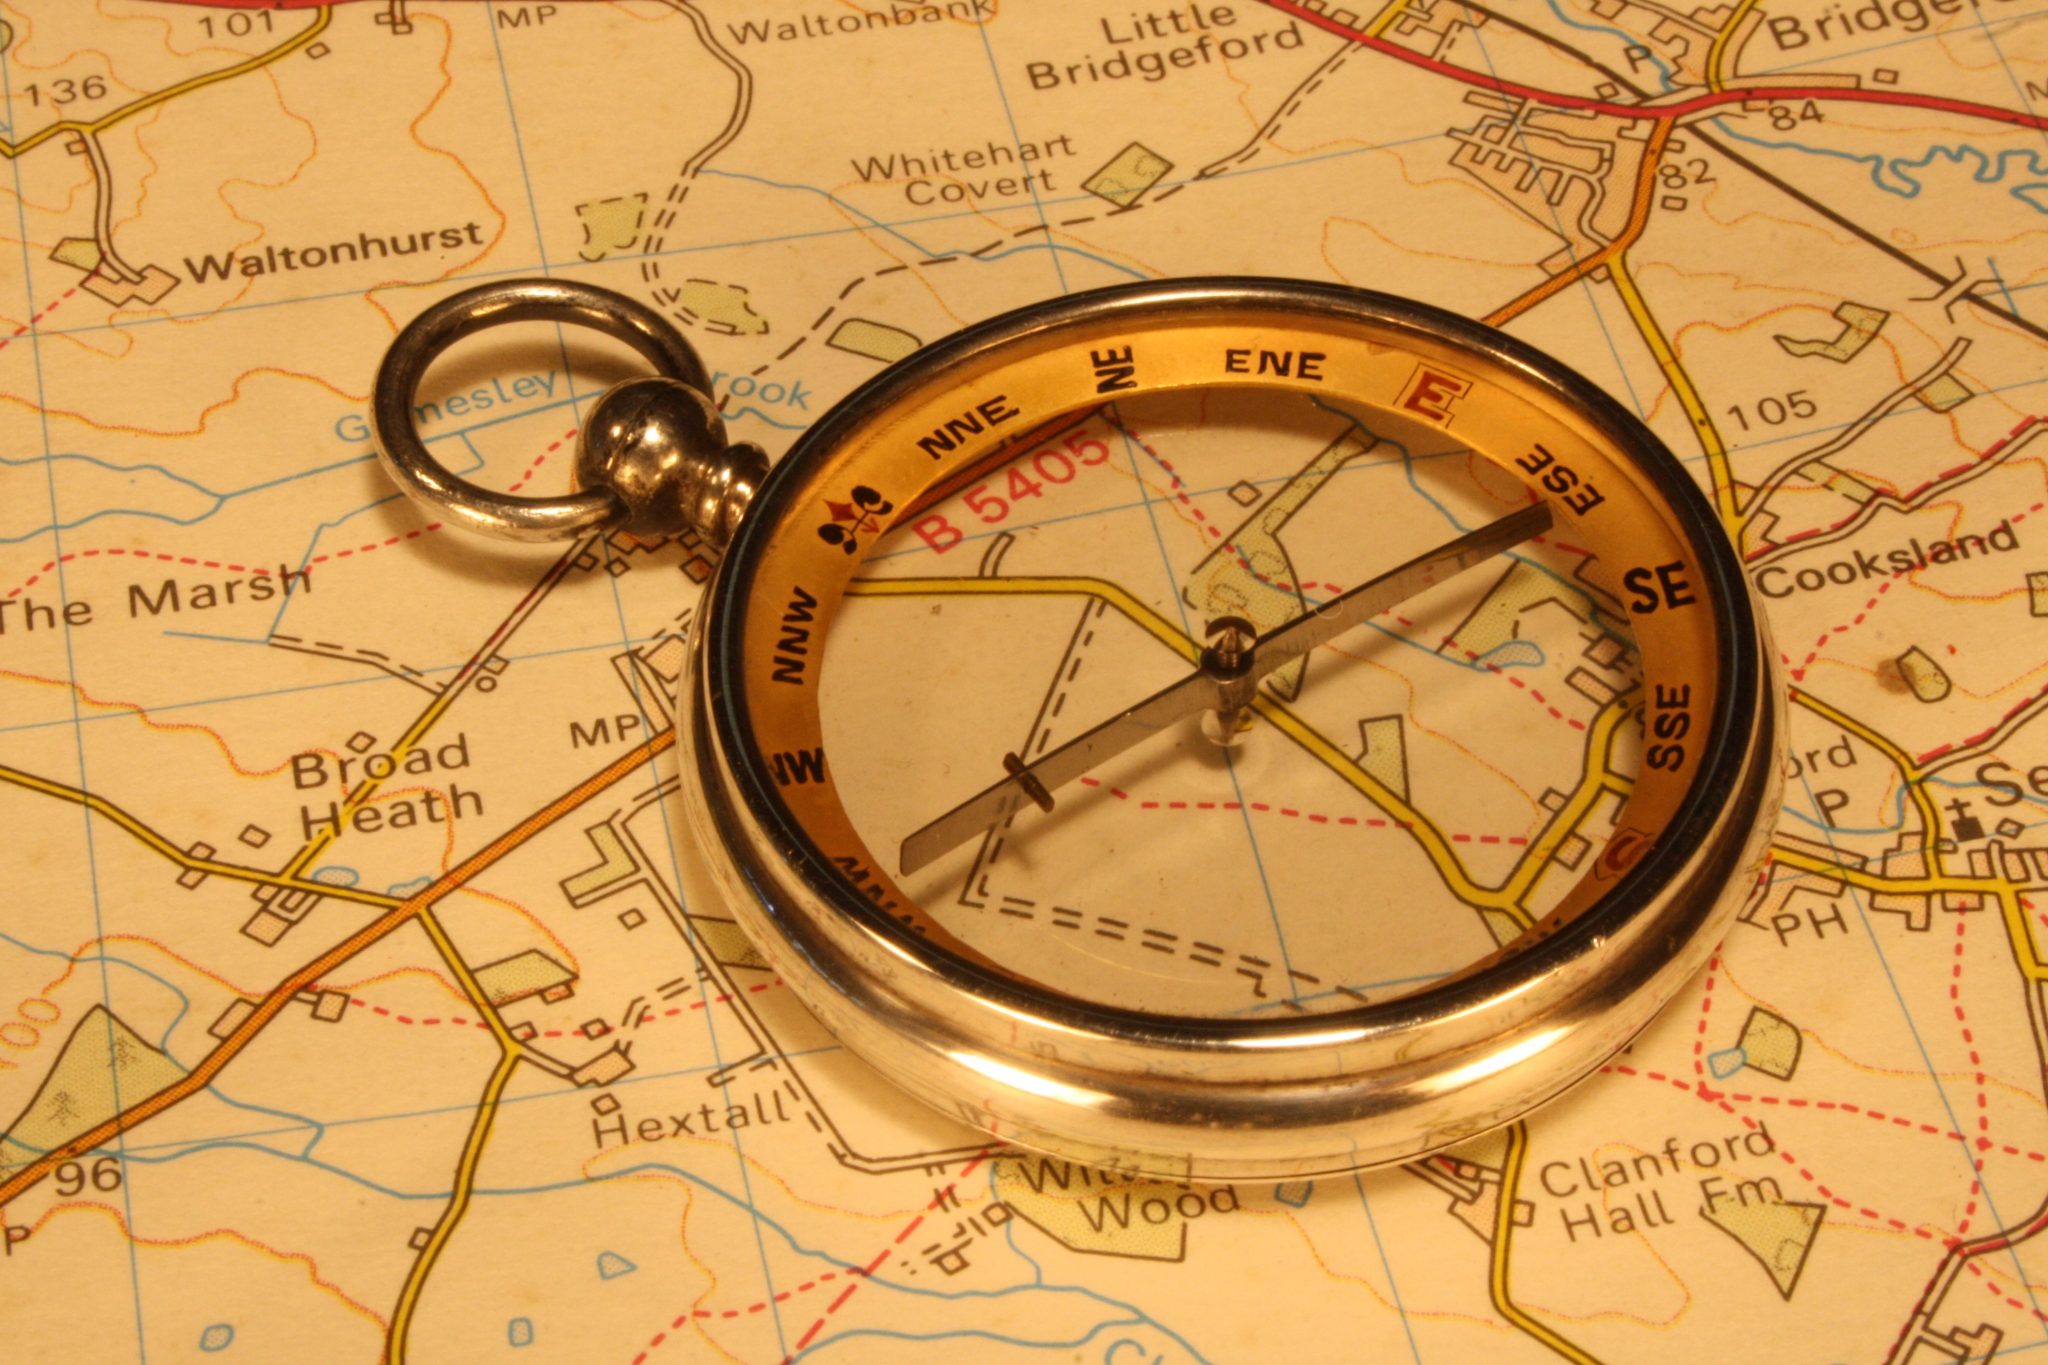 Image of Transparent Compass by Barker